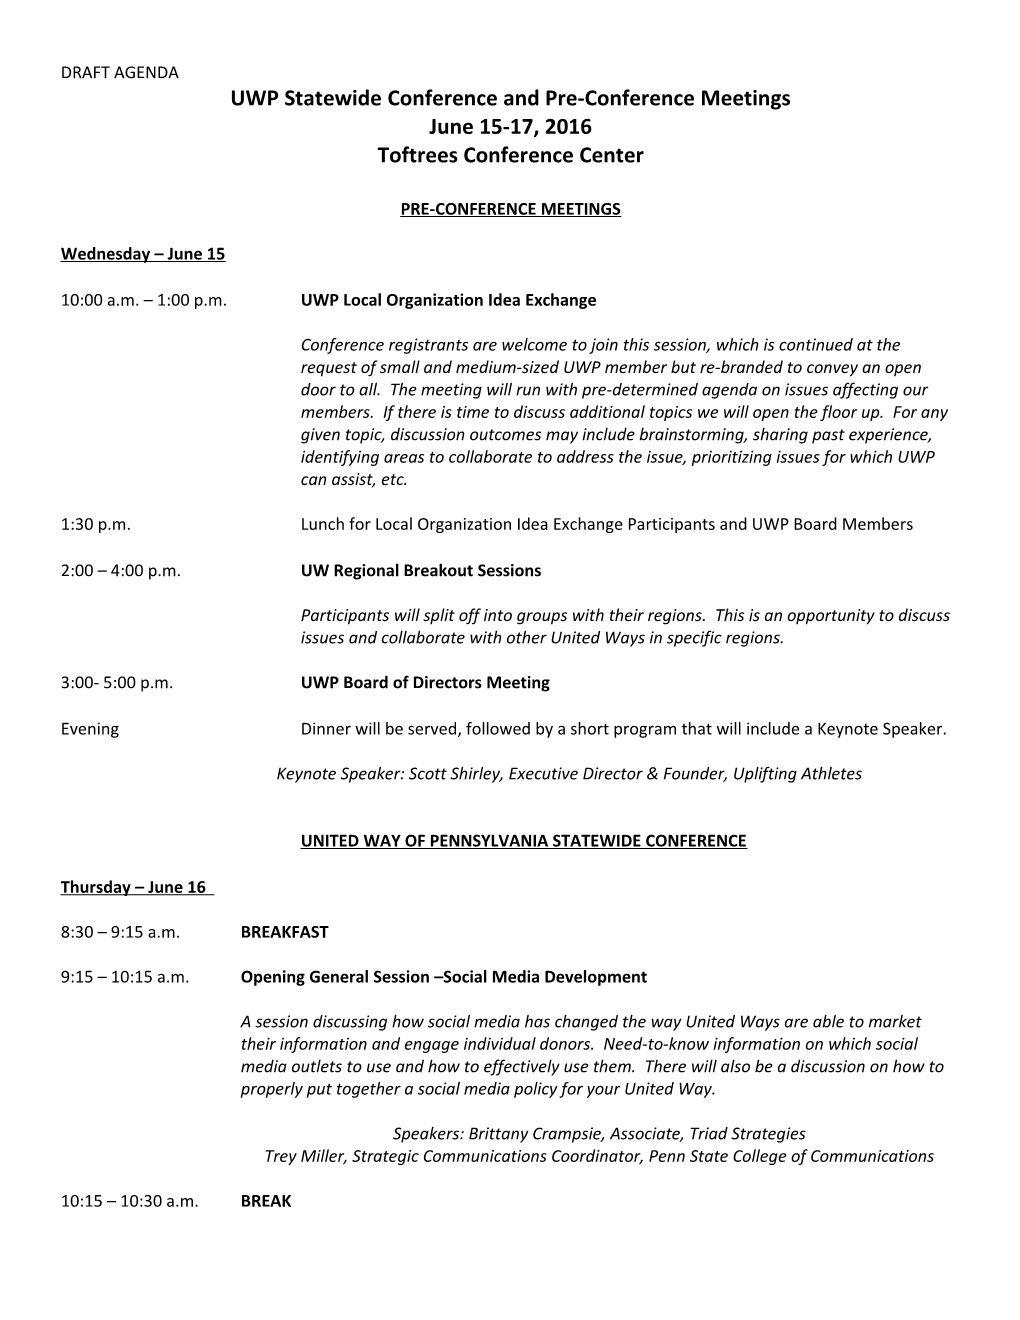 UWP Statewide Conference and Pre-Conference Meetings